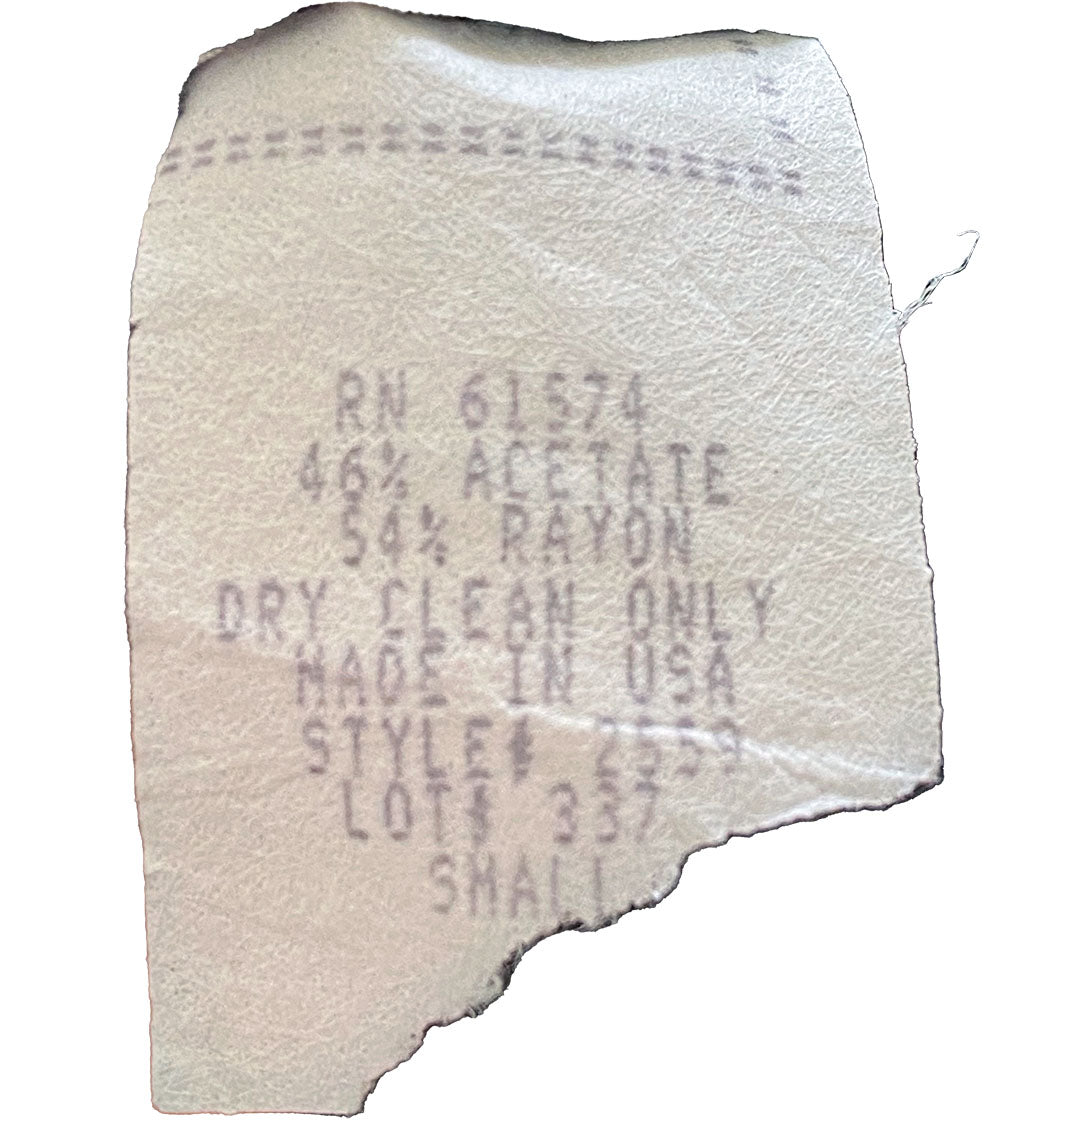 Distressed clothing tag from vintage pants.